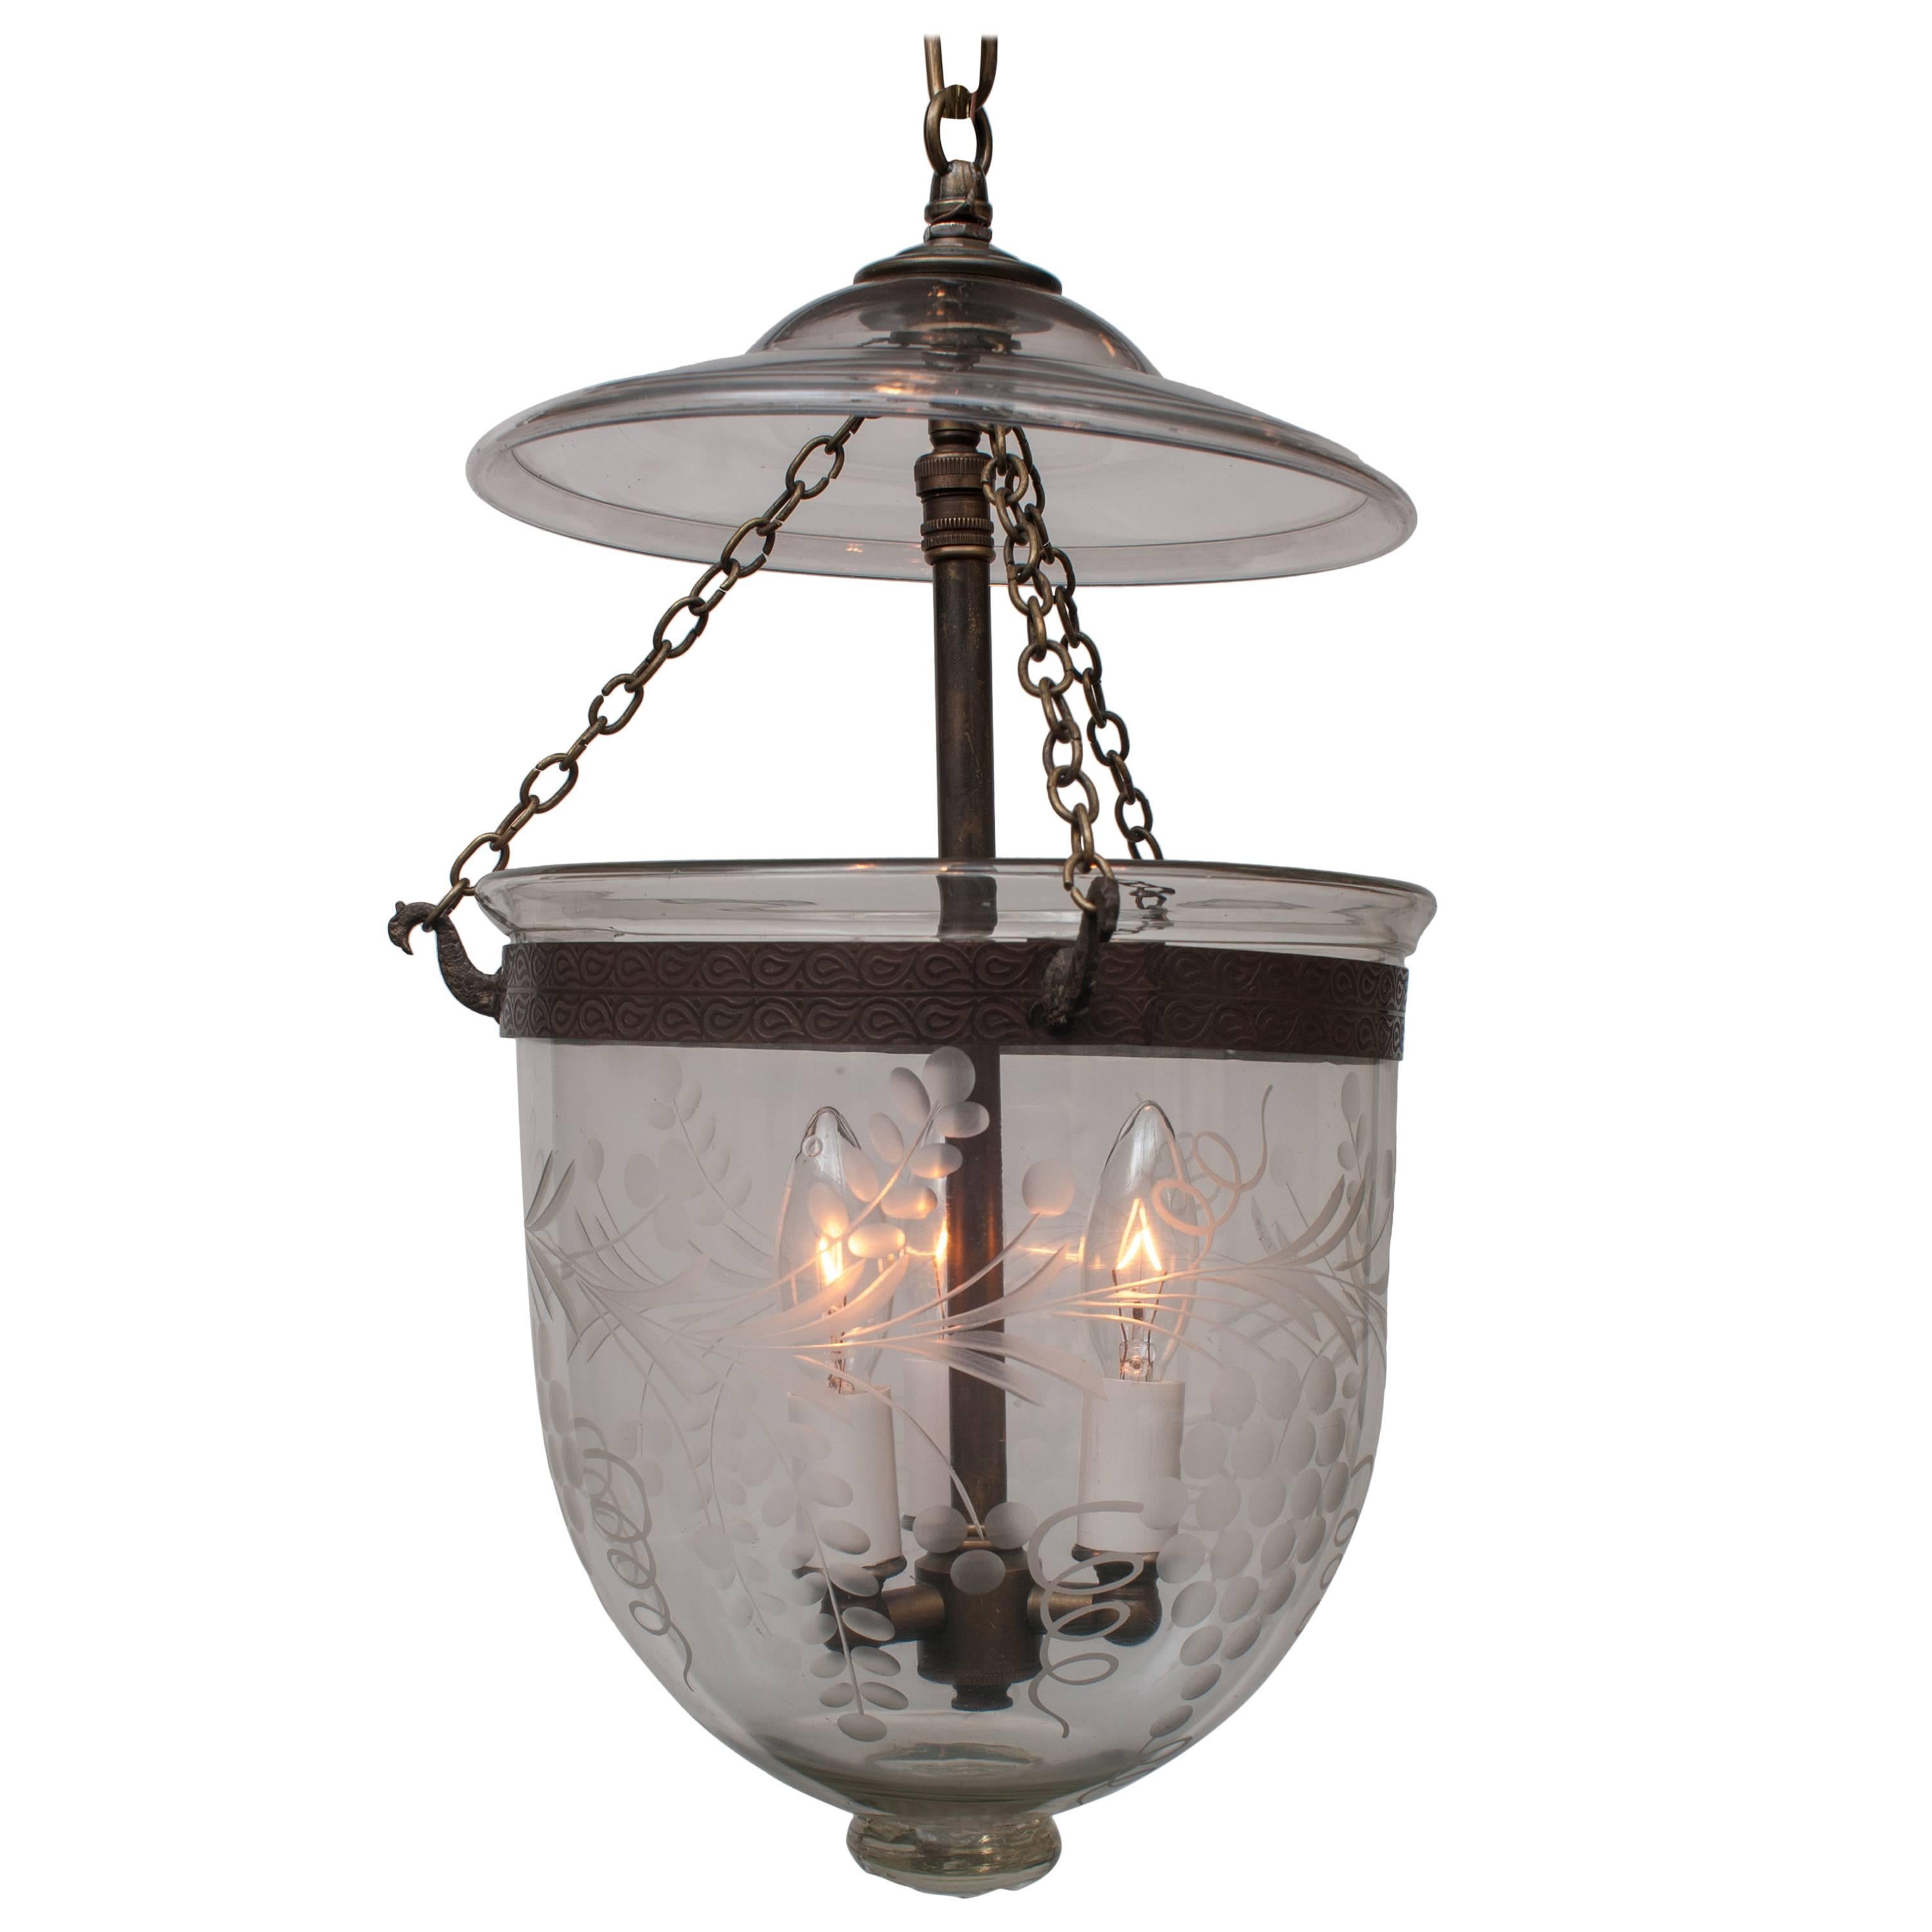 Bell Jar Lantern with Grape and Vine Etched Design